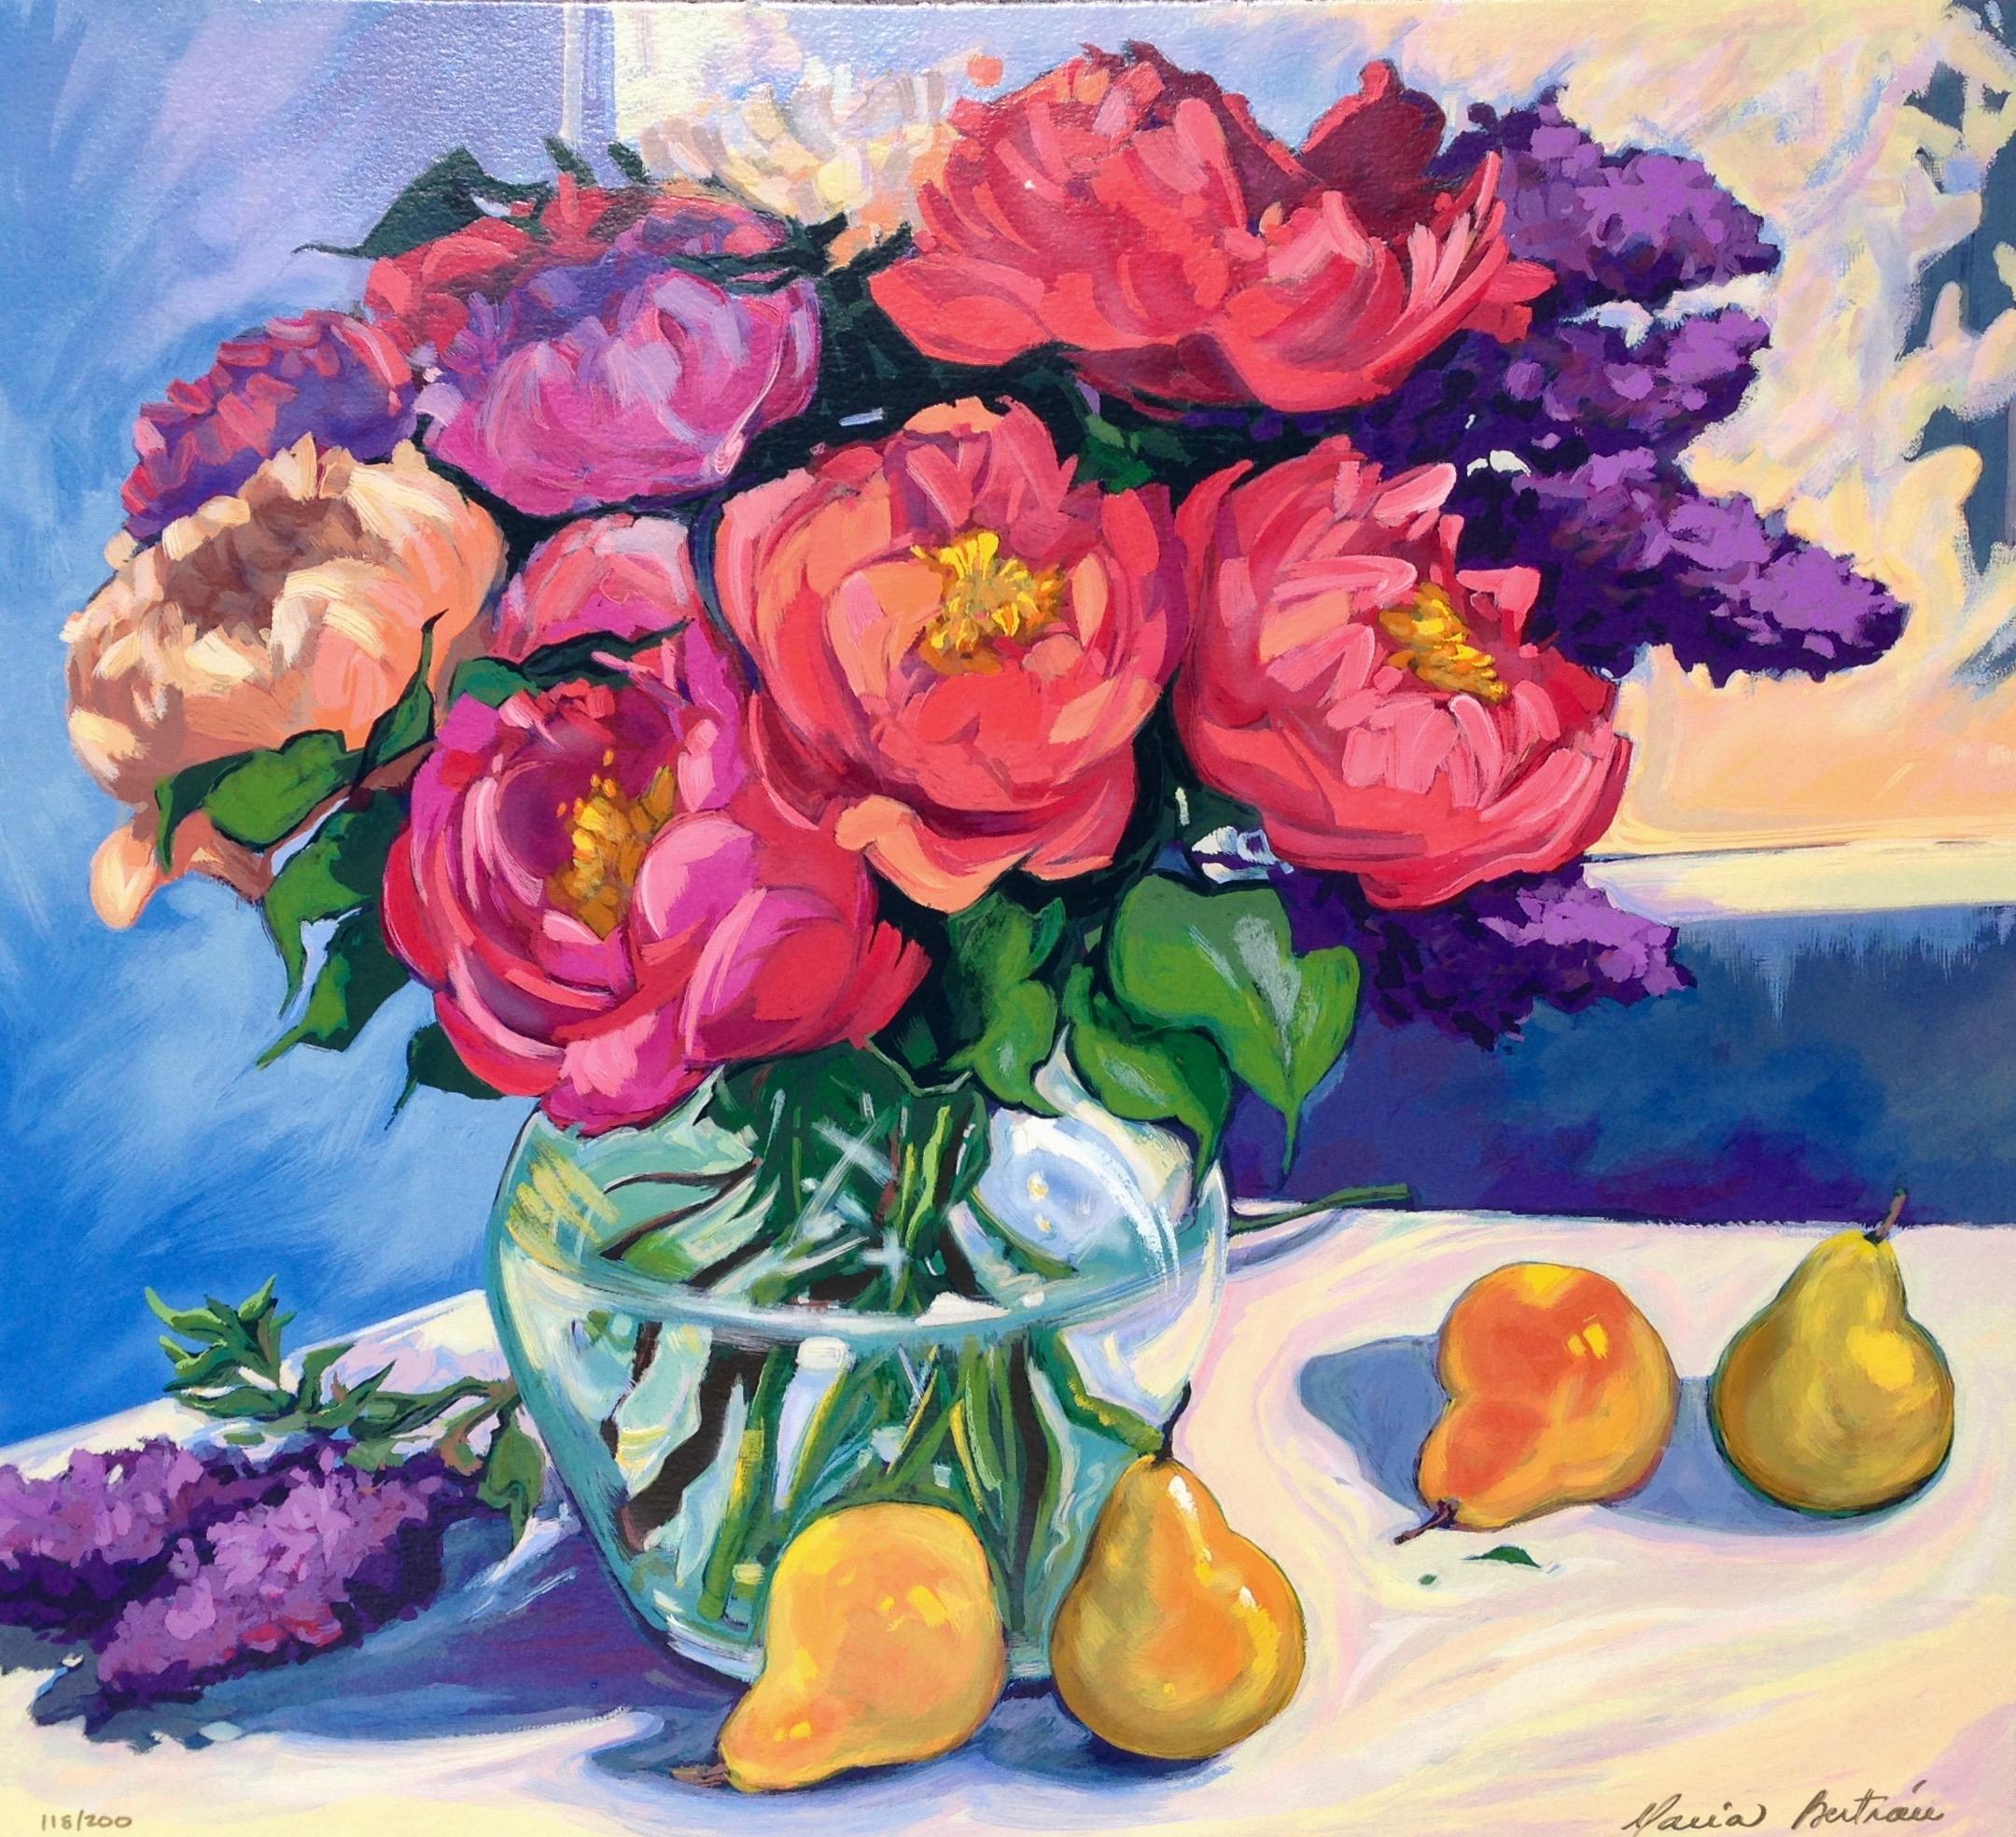 Maria Bertrán Landscape Print - "The Colors of Spring"  Contemporary Impressionist Floral Serigraph 